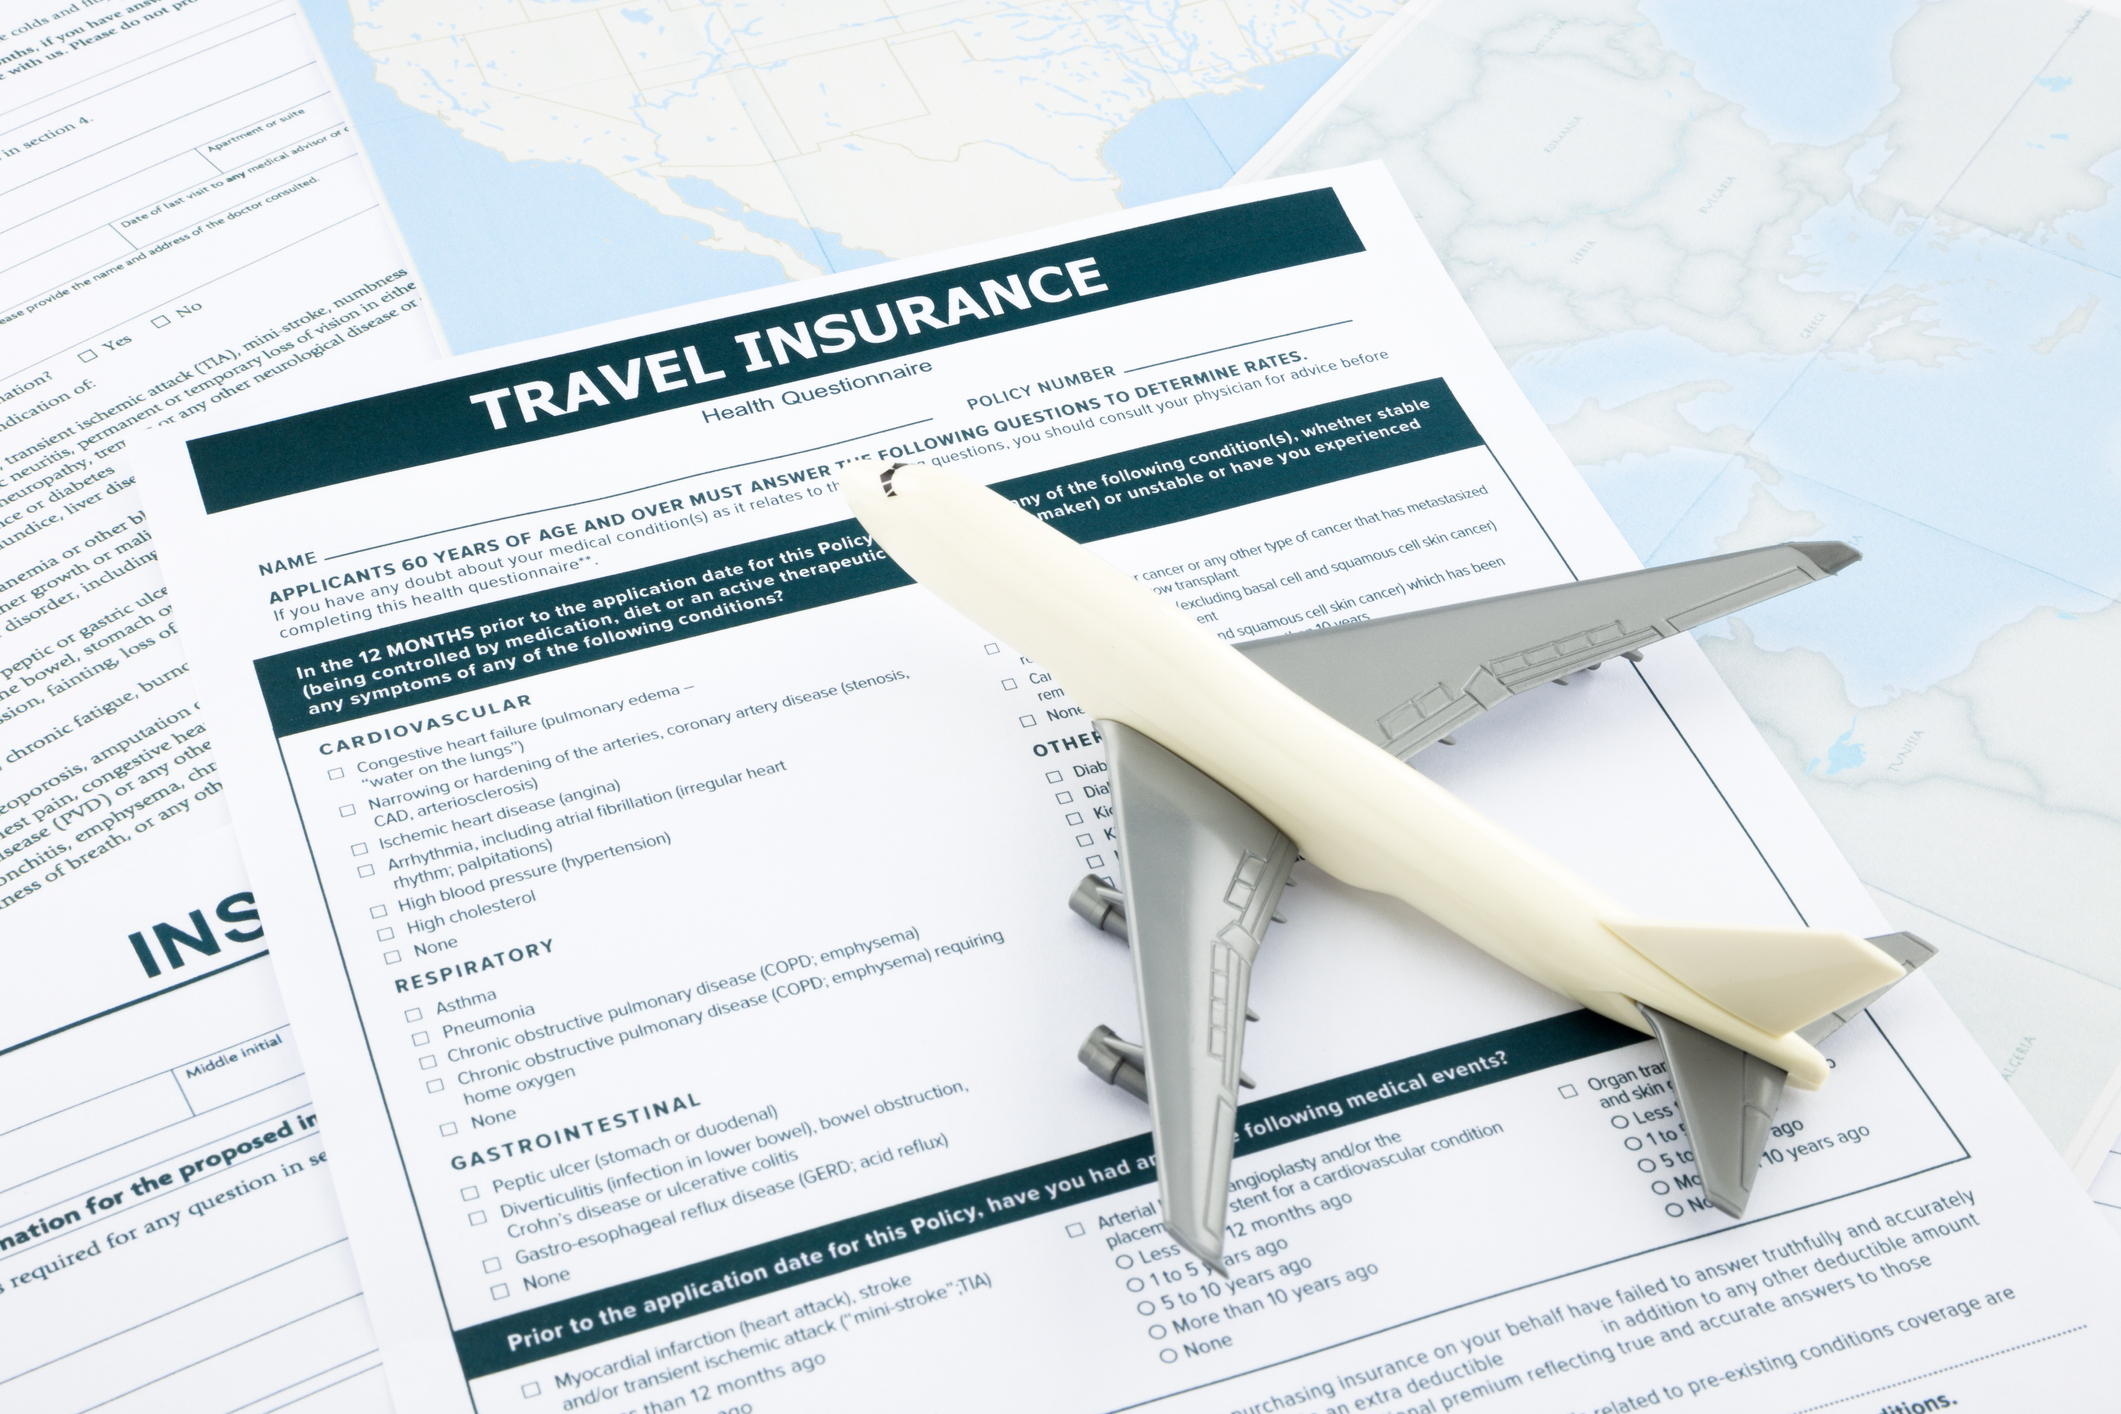 Join a Class Action Lawsuit Against the Airline to Pursue Damages